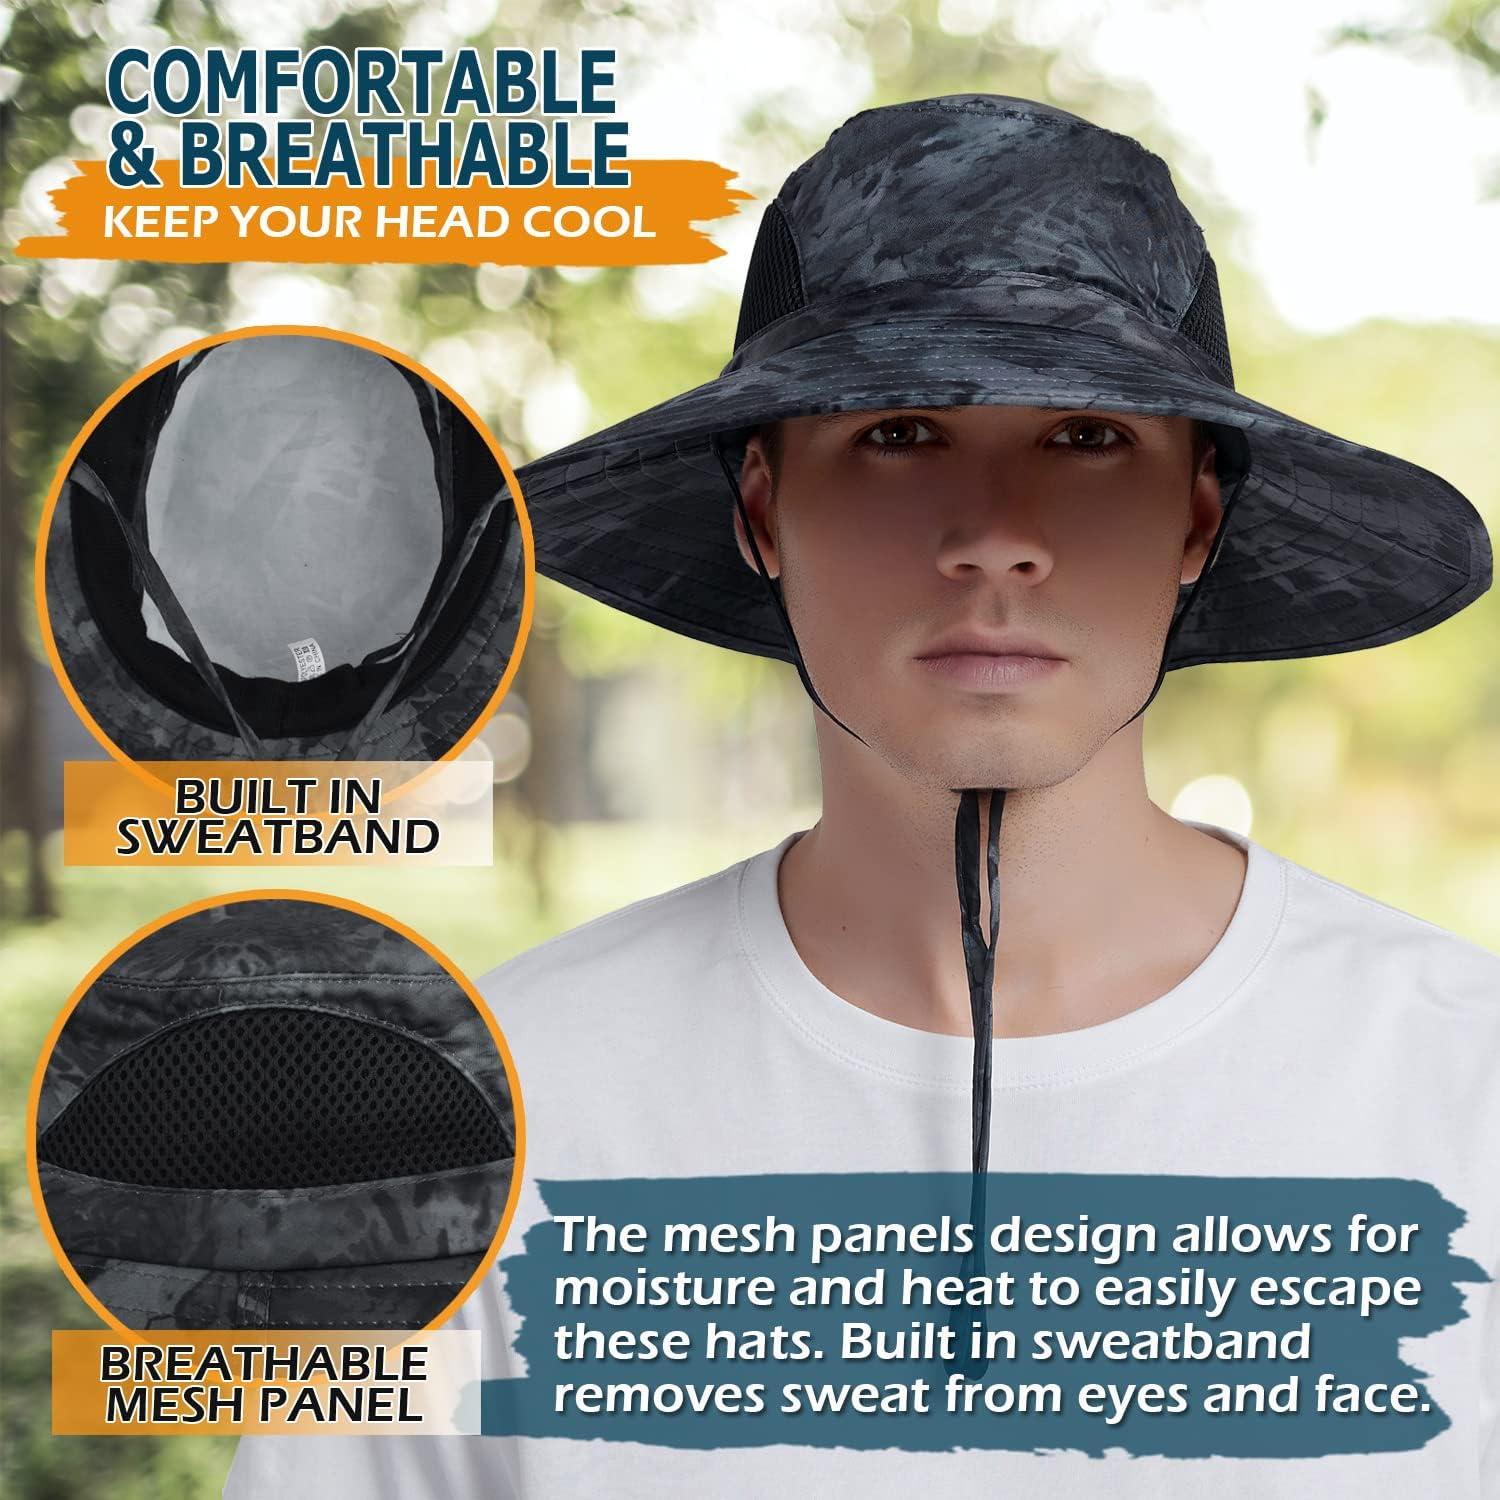 Fishing Hats for Men and Women Men's Hiking Hat with Wide Brim Face Cover Beach Sun Hat Safari Hunting Gardening Foldable Bucket Hat